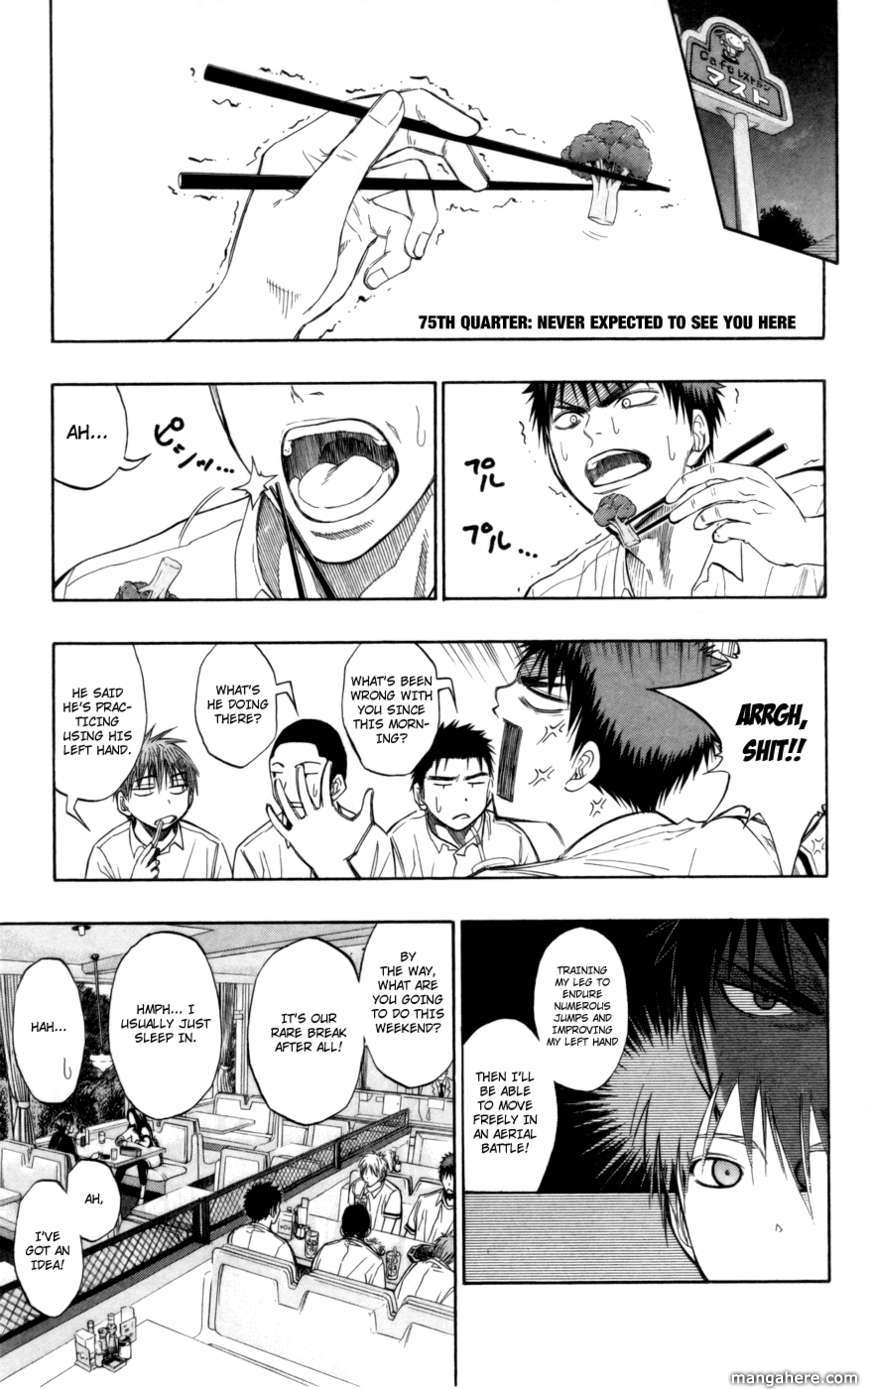 Kuroko No Basket Vol.09 Chapter 075 : Never Expected To See You Here - Picture 1